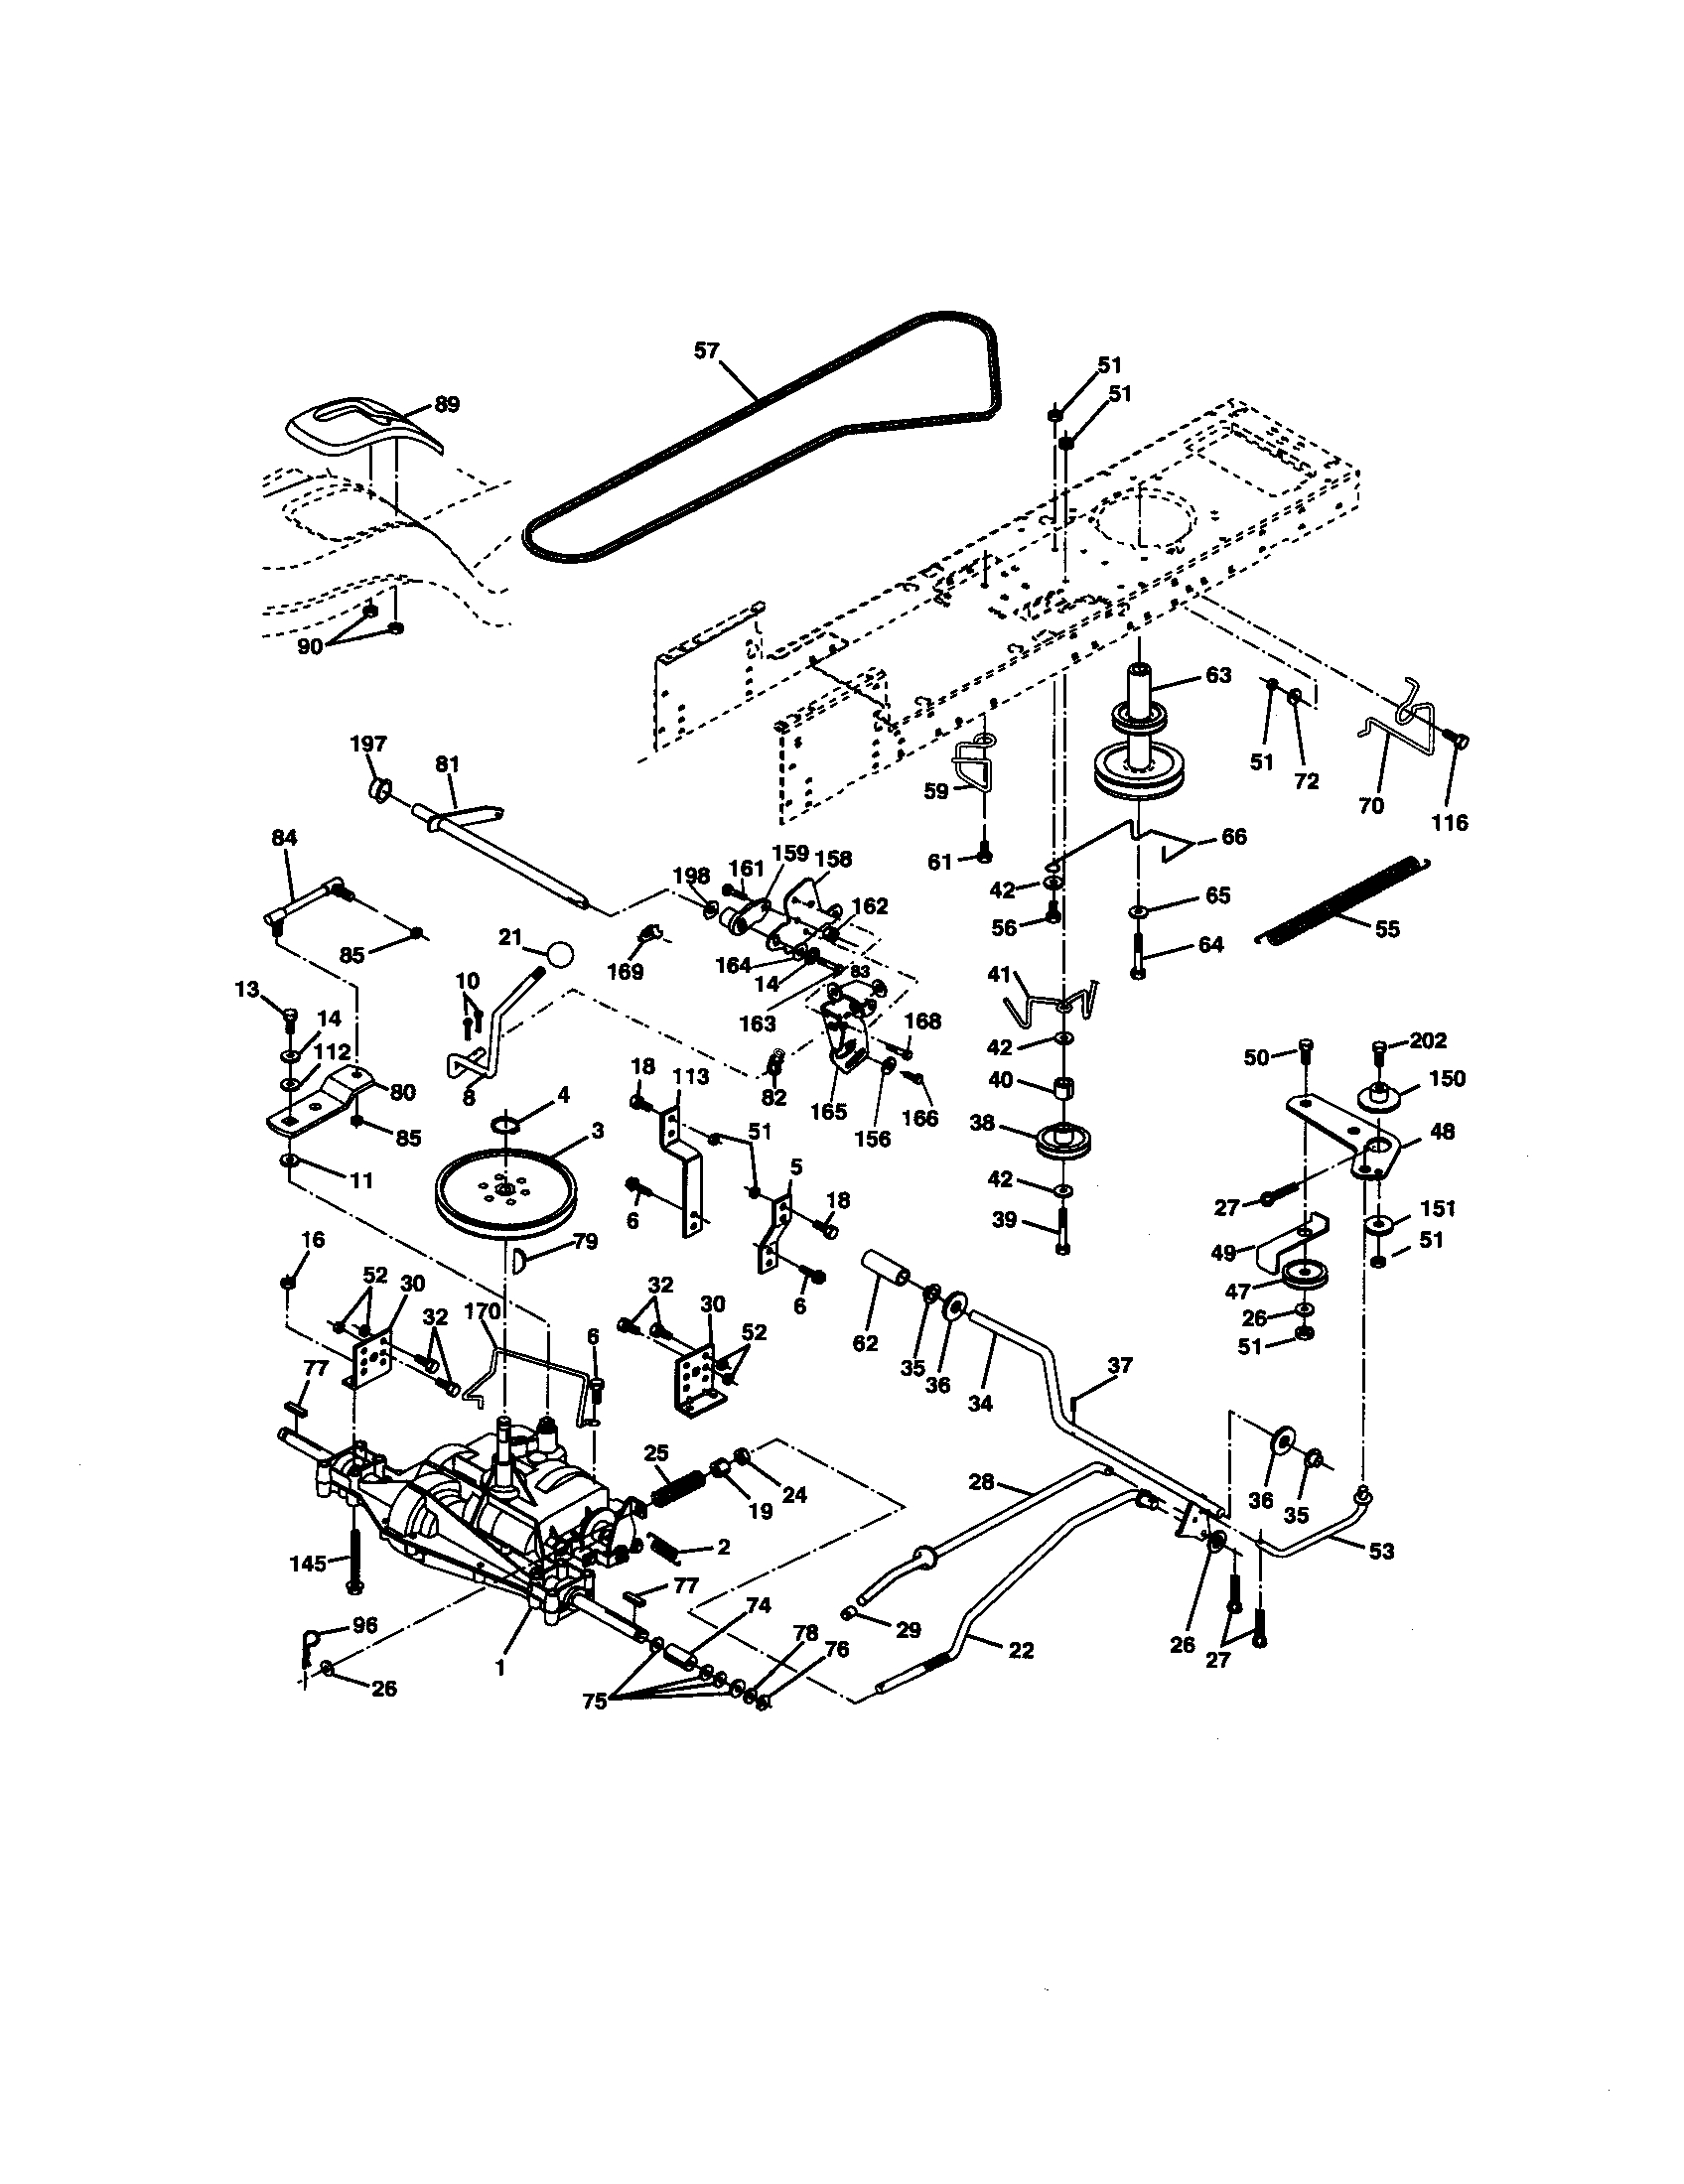 Craftsman Riding Lawn Mower Parts Diagram Looking For Craftsman Model 917270671 Front Engine Lawn Tractor